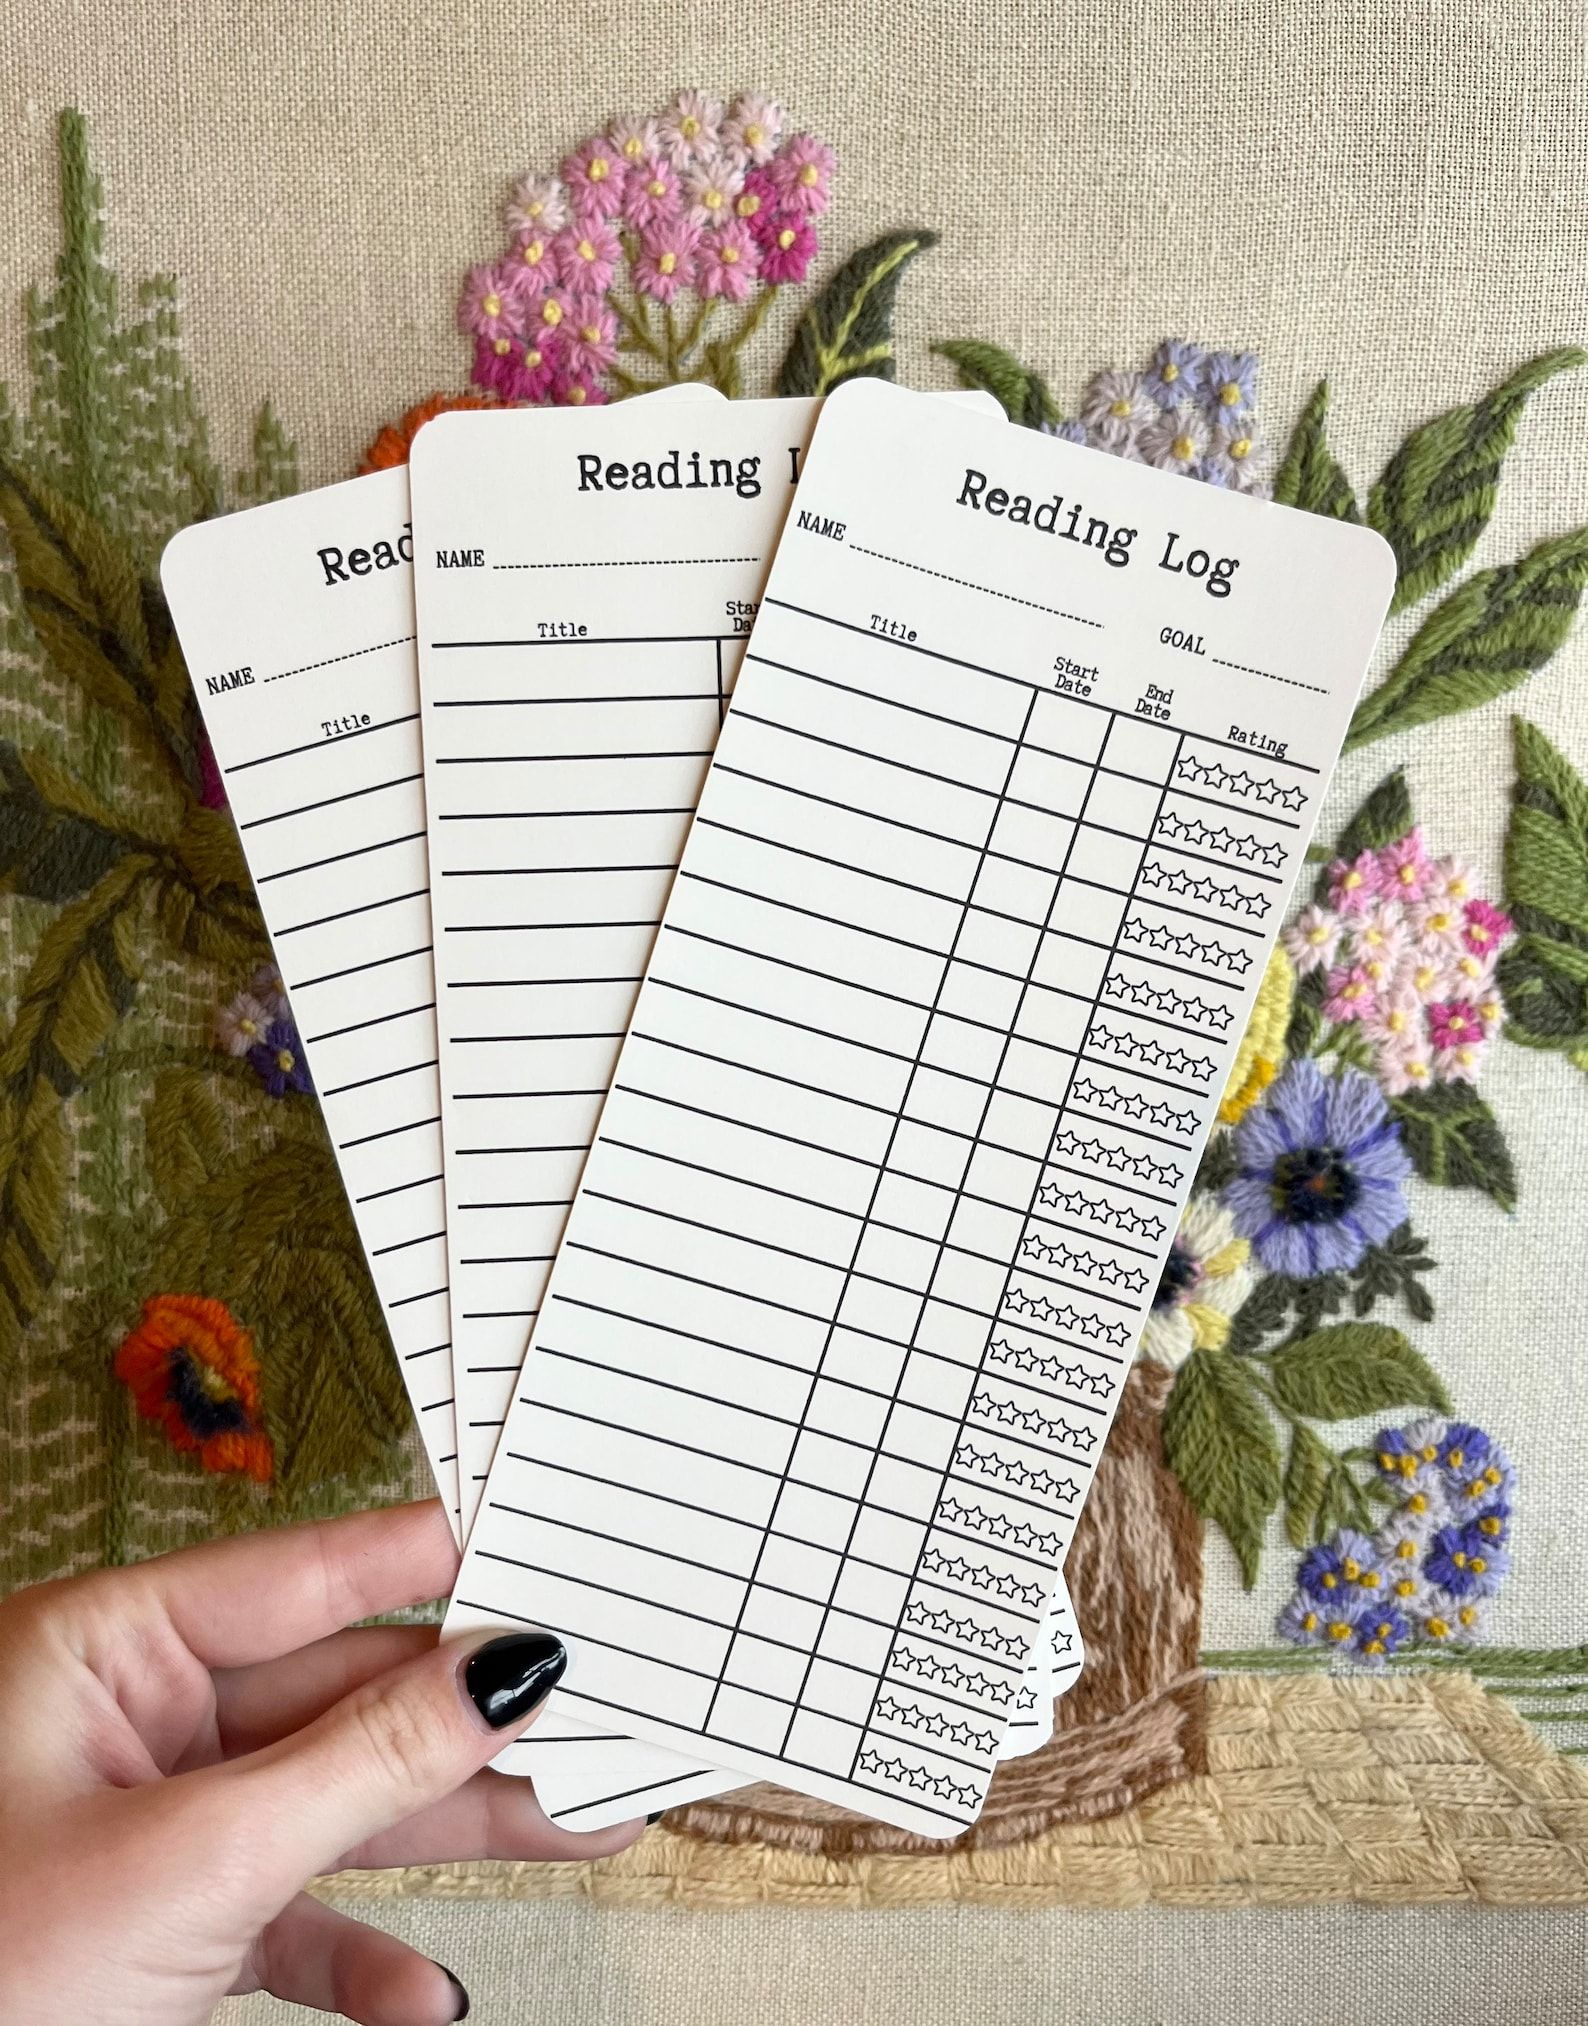 Three bookmarks that have lines for tracking your title, start date, end date, and a star rating.